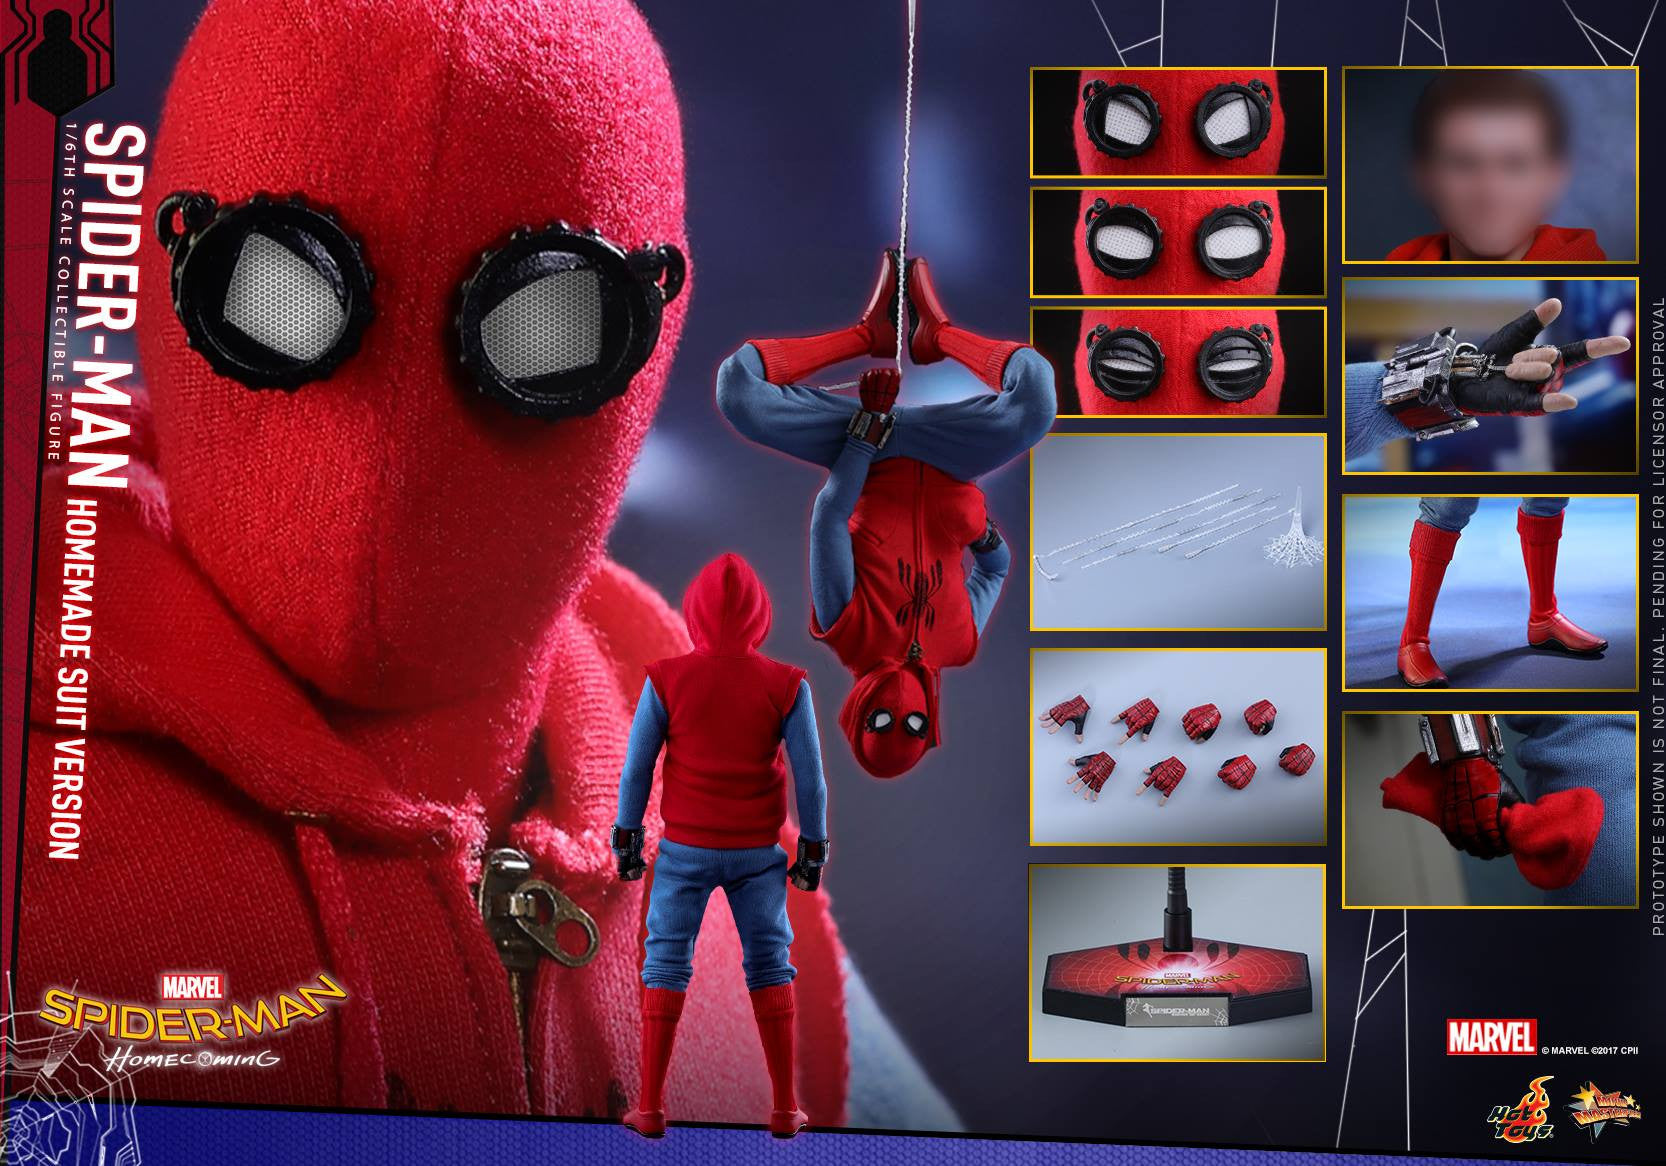 Hot Toys - MMS414 - Spider-Man: Homecoming - Spider-Man (Homemade Suit Version) - Marvelous Toys